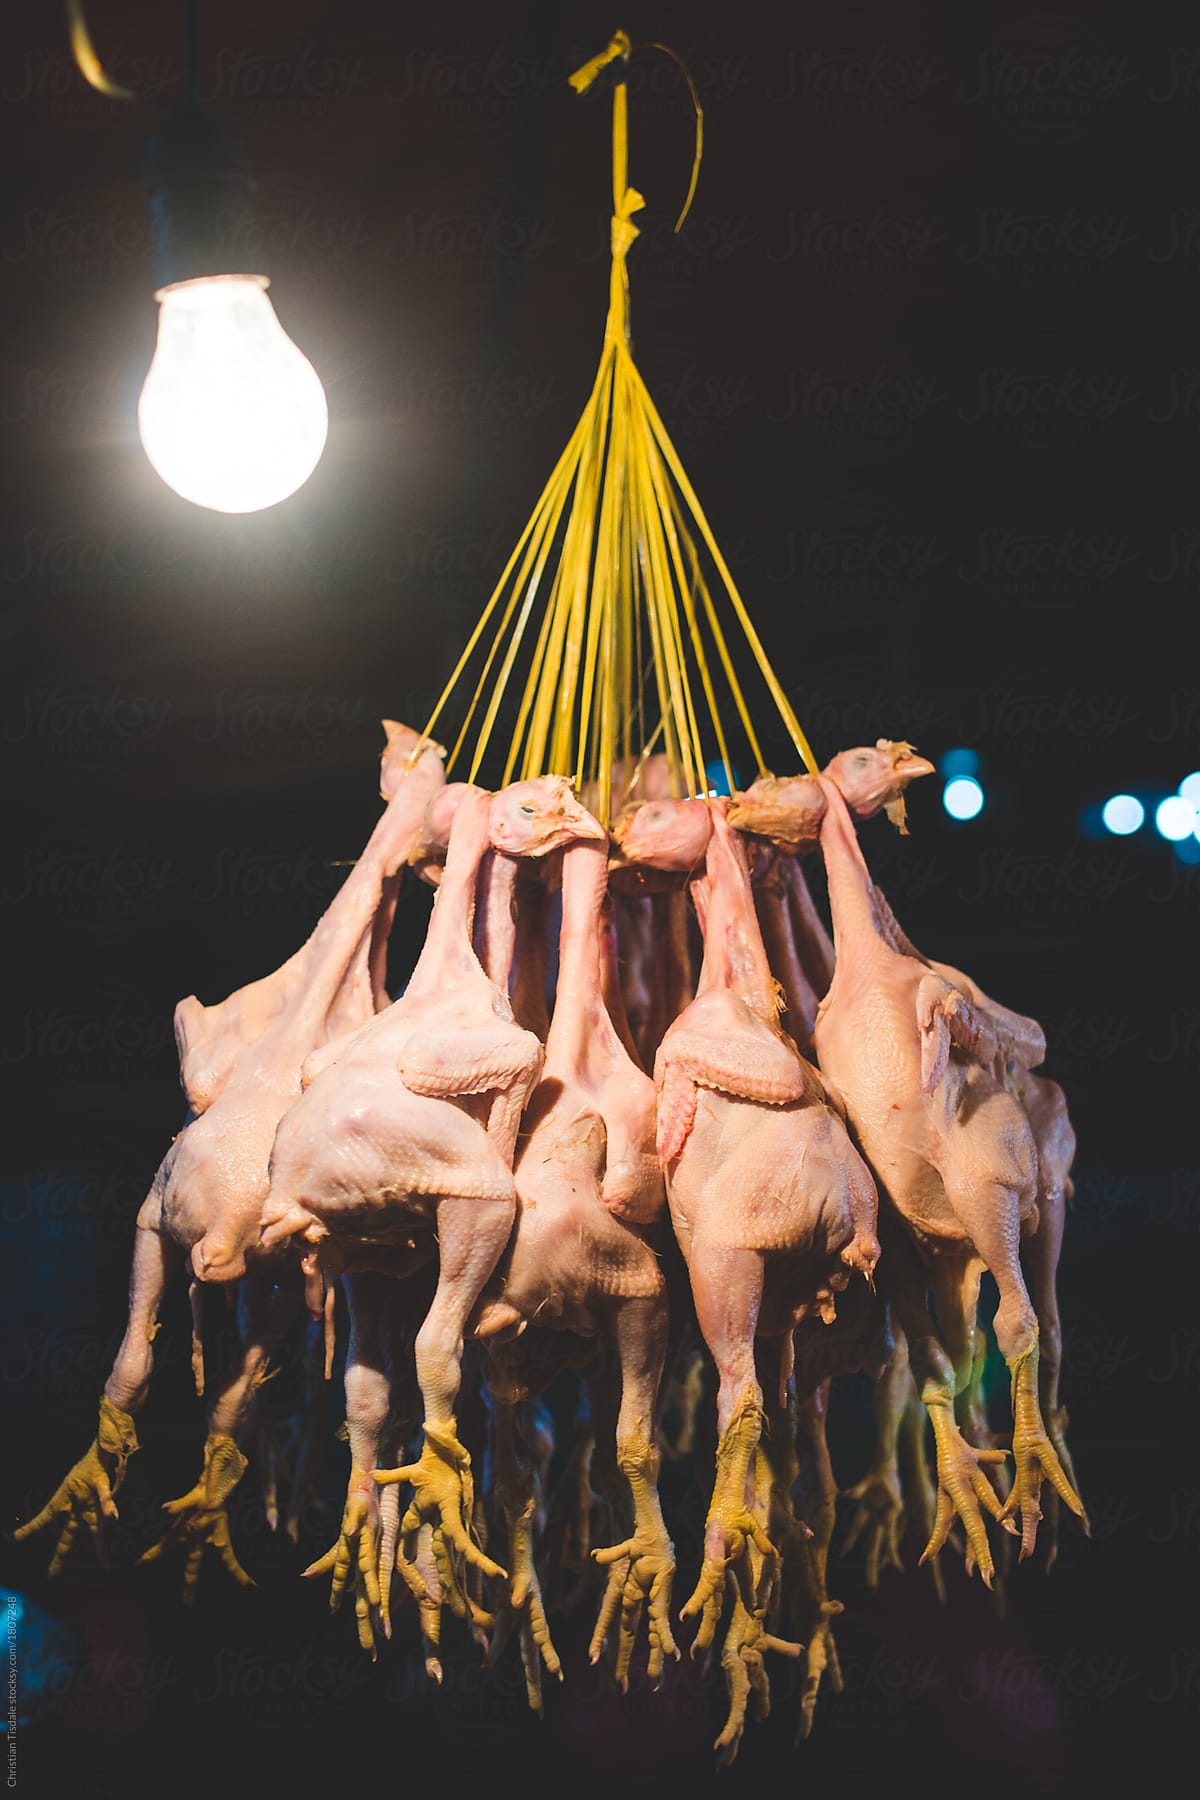 A Bunch Of 10 Dead Plucked Chickens Hanging From Metal Hooks In